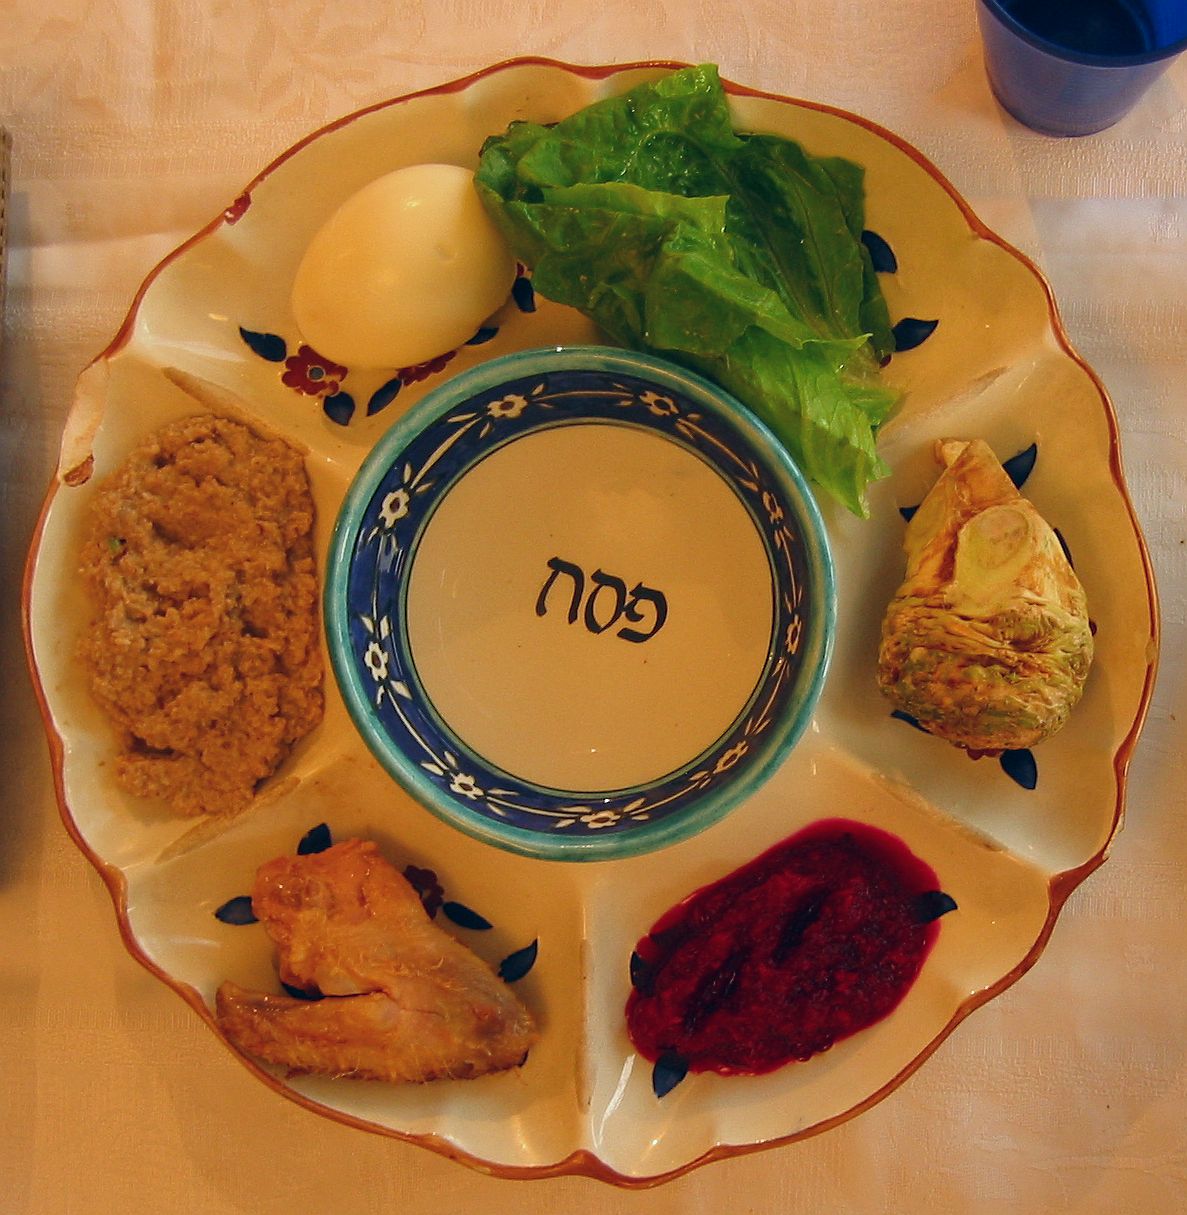 A traditional Pesach or Passover plate. Simple white circle with Hebrew symbol in middle. 